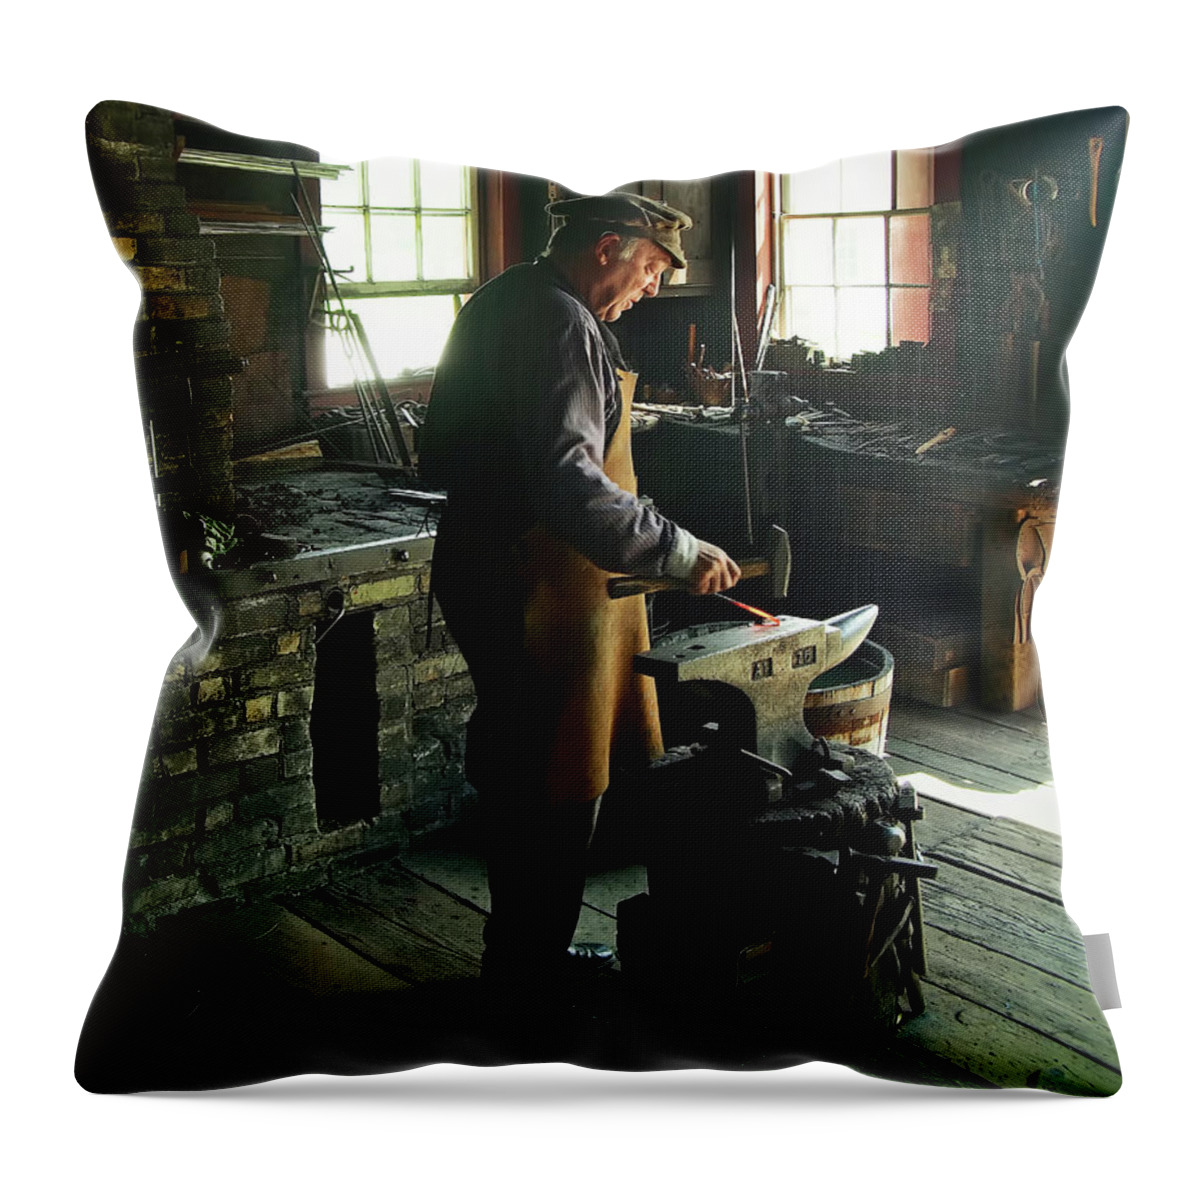 Old Throw Pillow featuring the photograph The Blacksmith by Scott Olsen